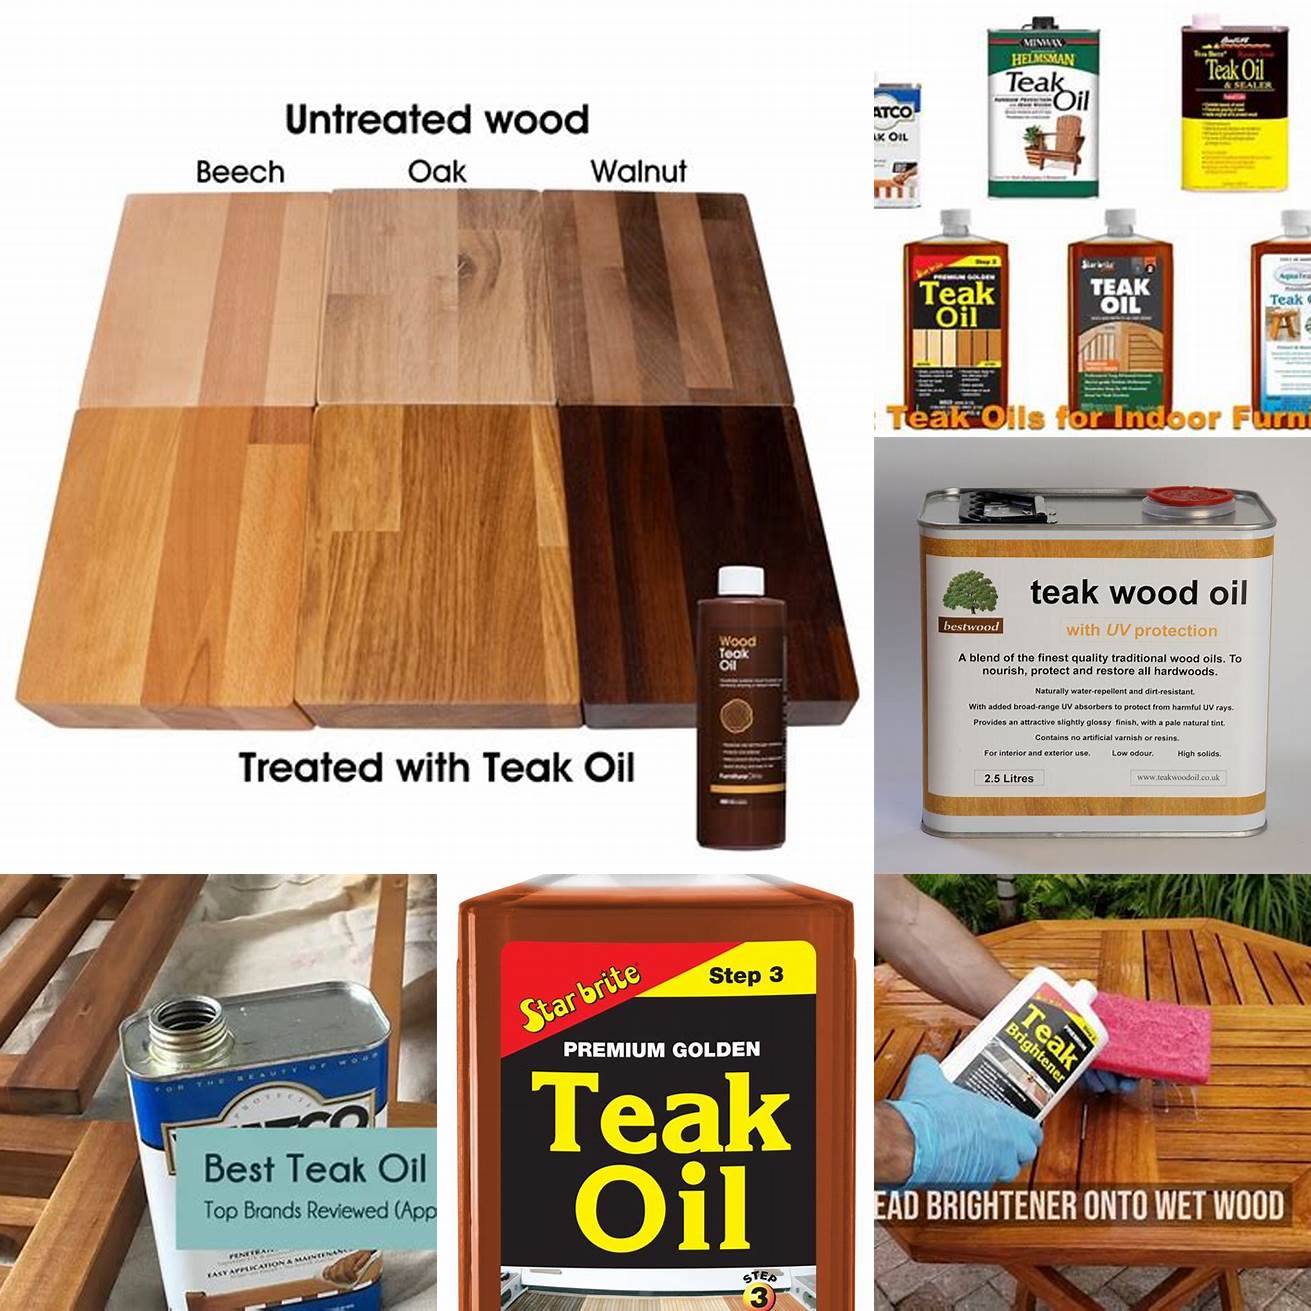 Picture of the different types of teak oil